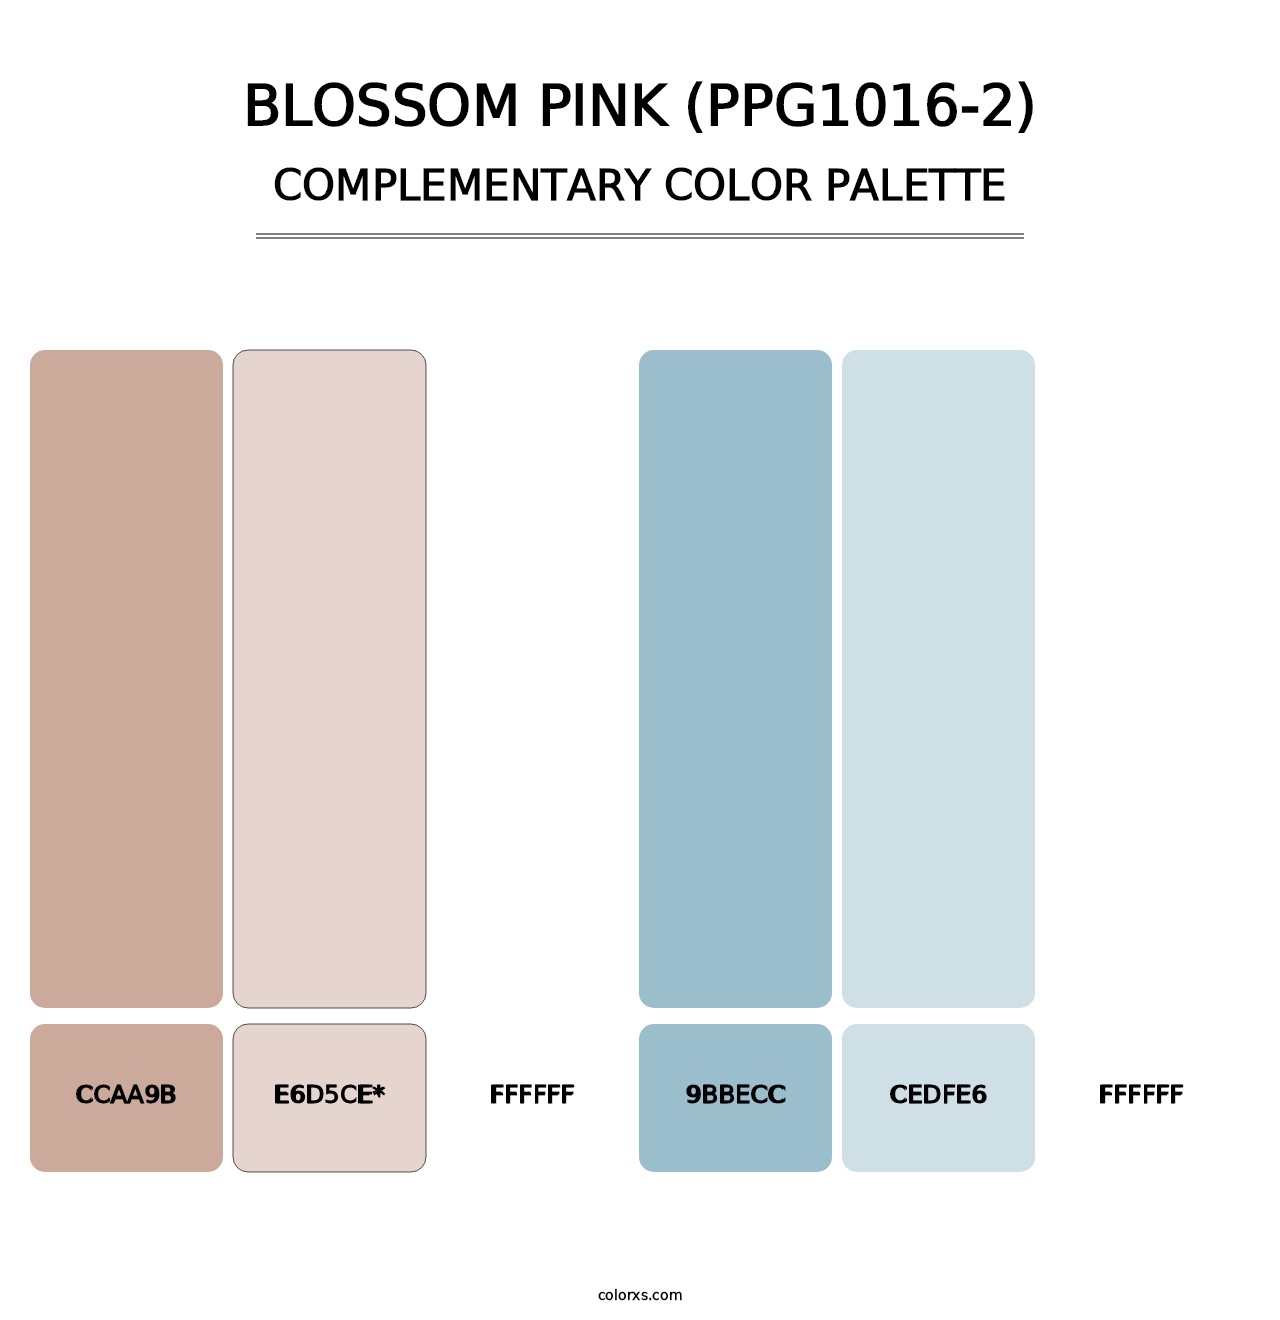 Blossom Pink (PPG1016-2) - Complementary Color Palette